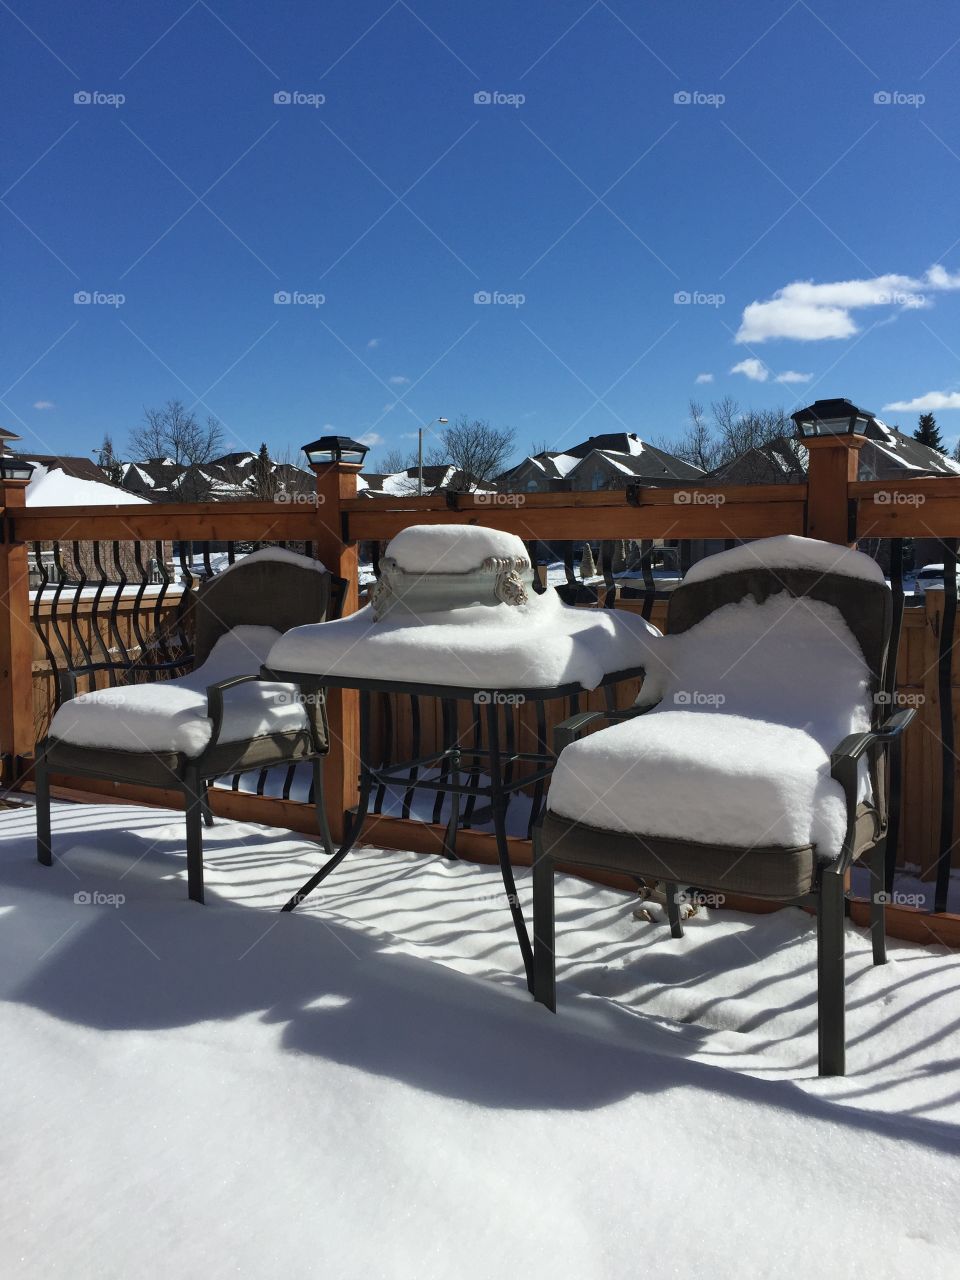 No Person, Wood, Snow, Chair, Furniture